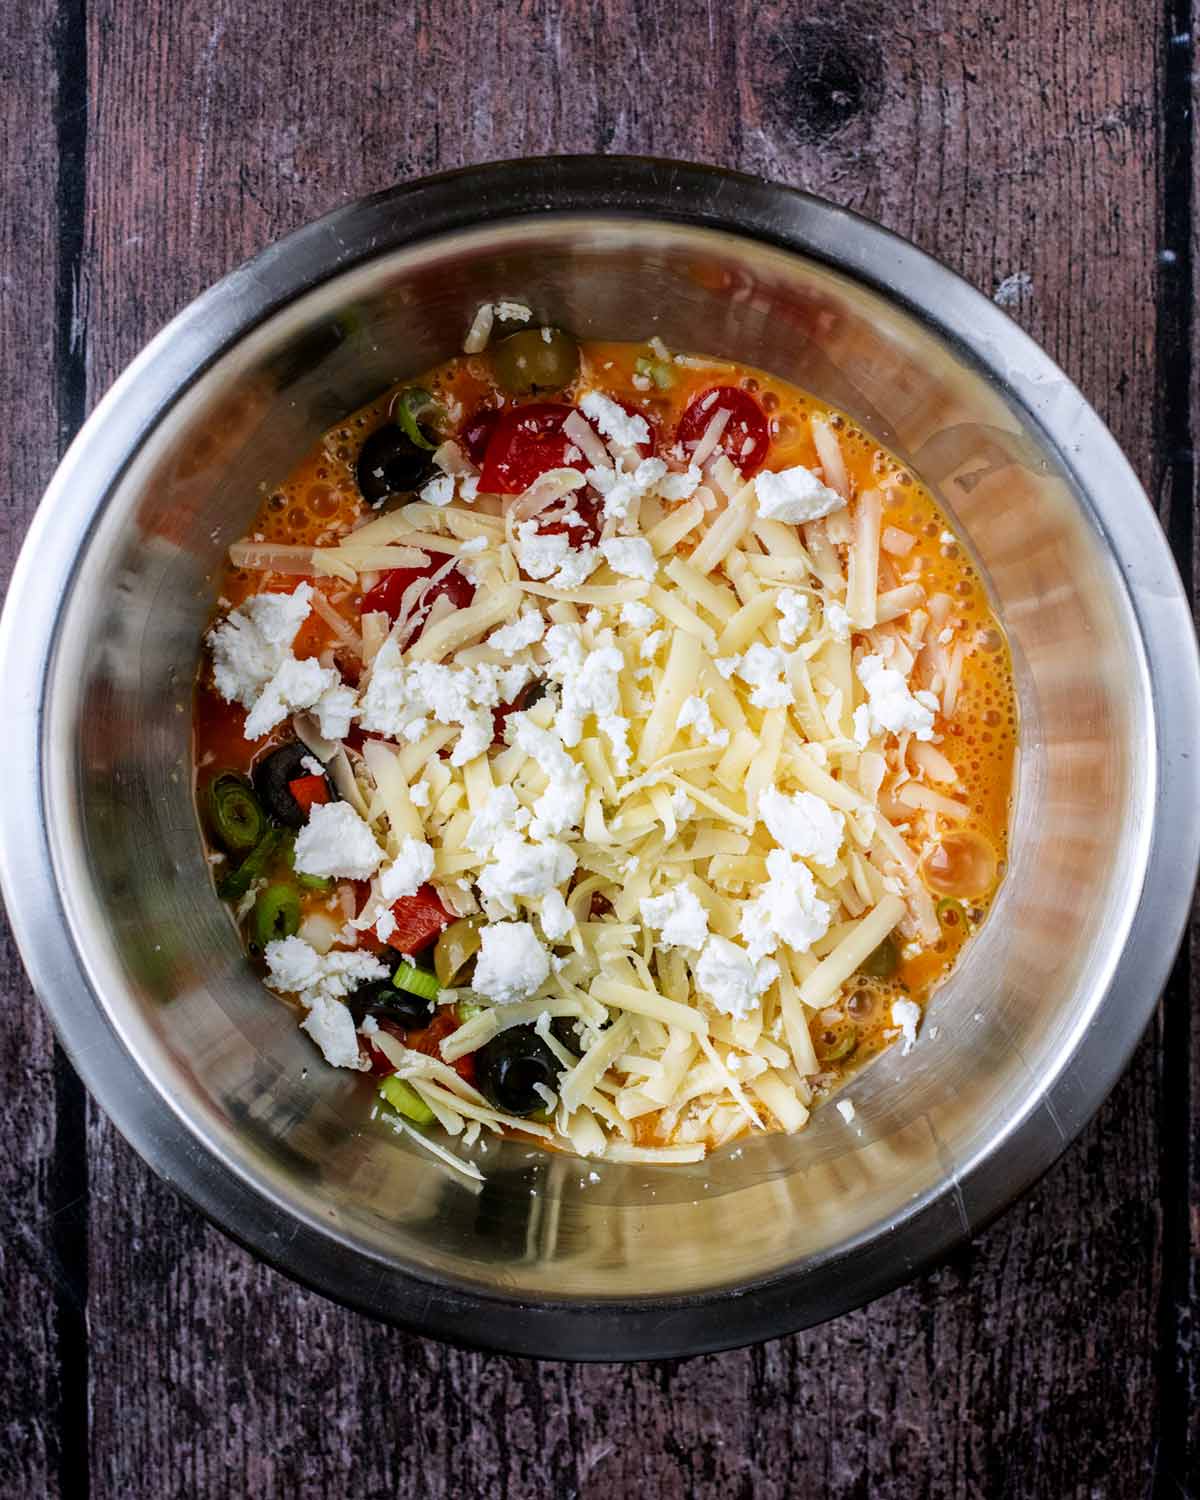 A mixing bowl containing whisked eggs, tomatoes, peppers, onions and cheese.